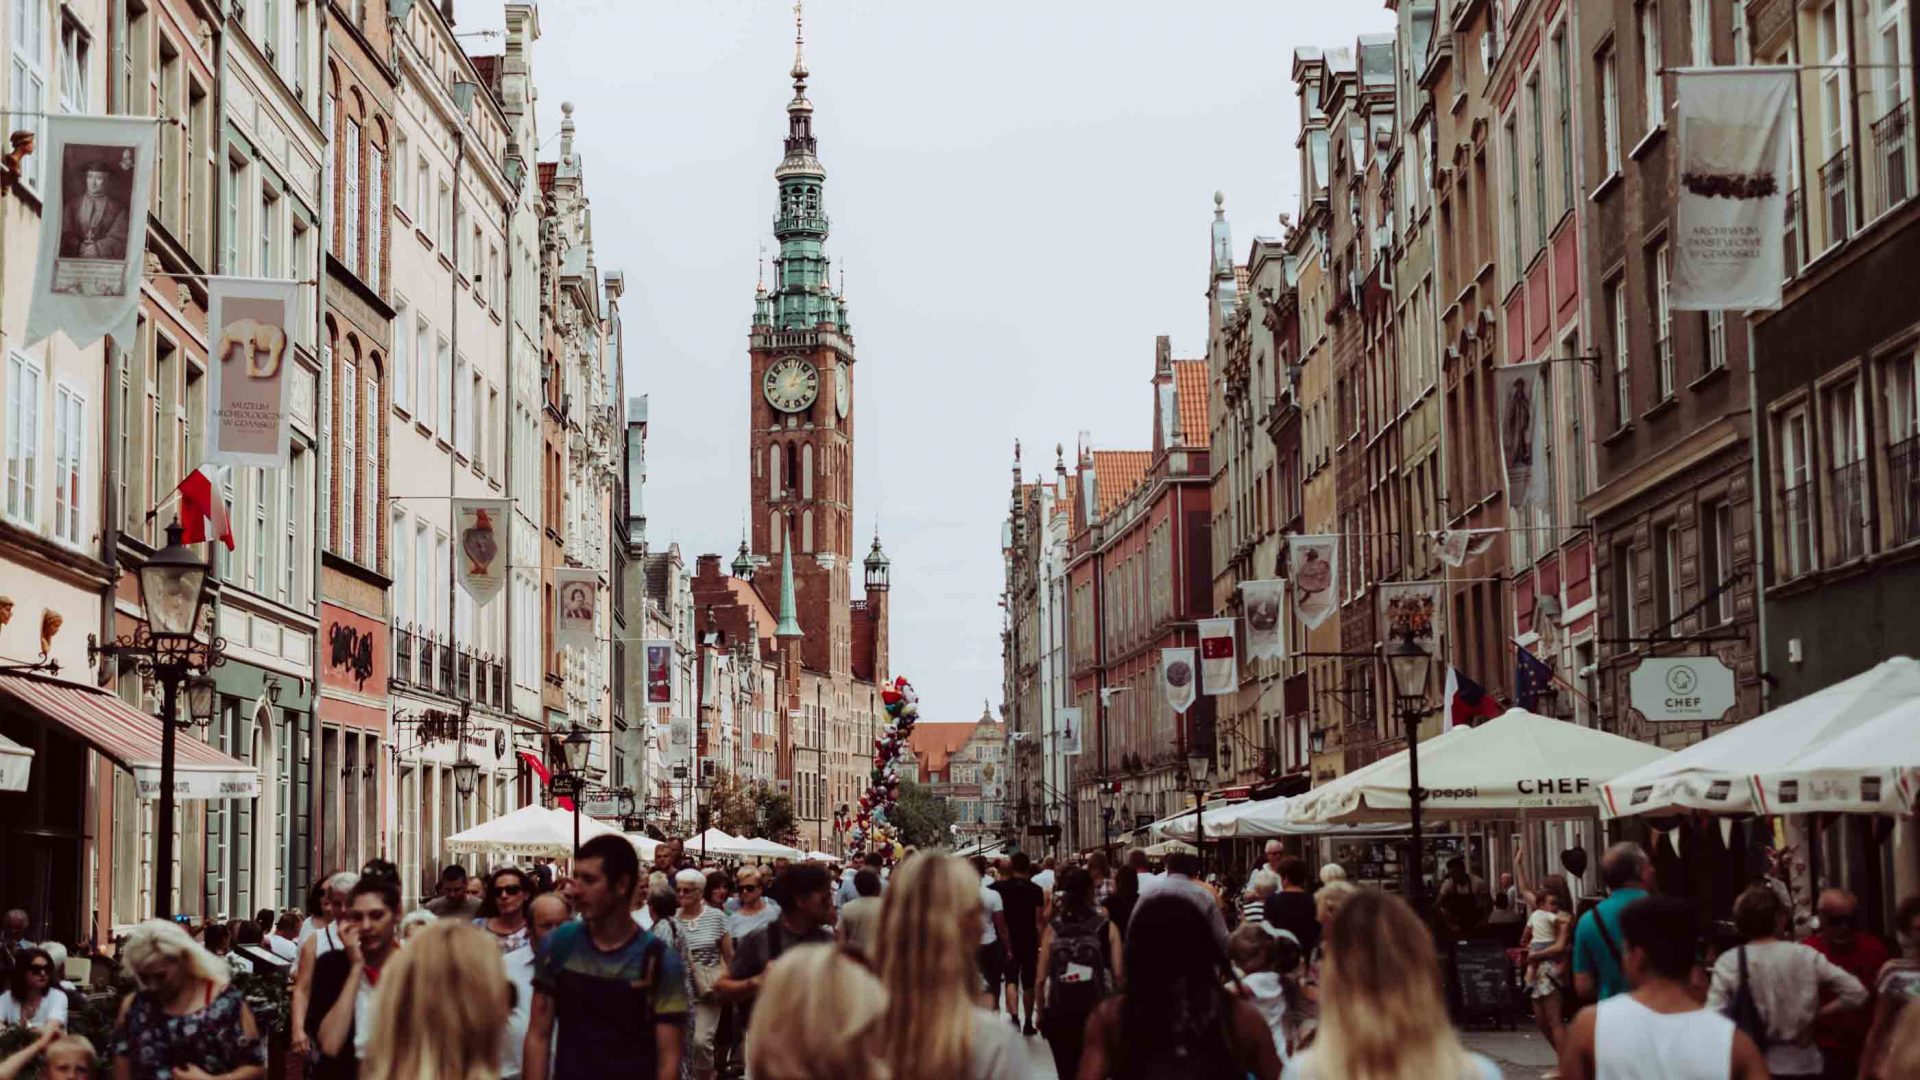 Tourists fill and old town in Poland.